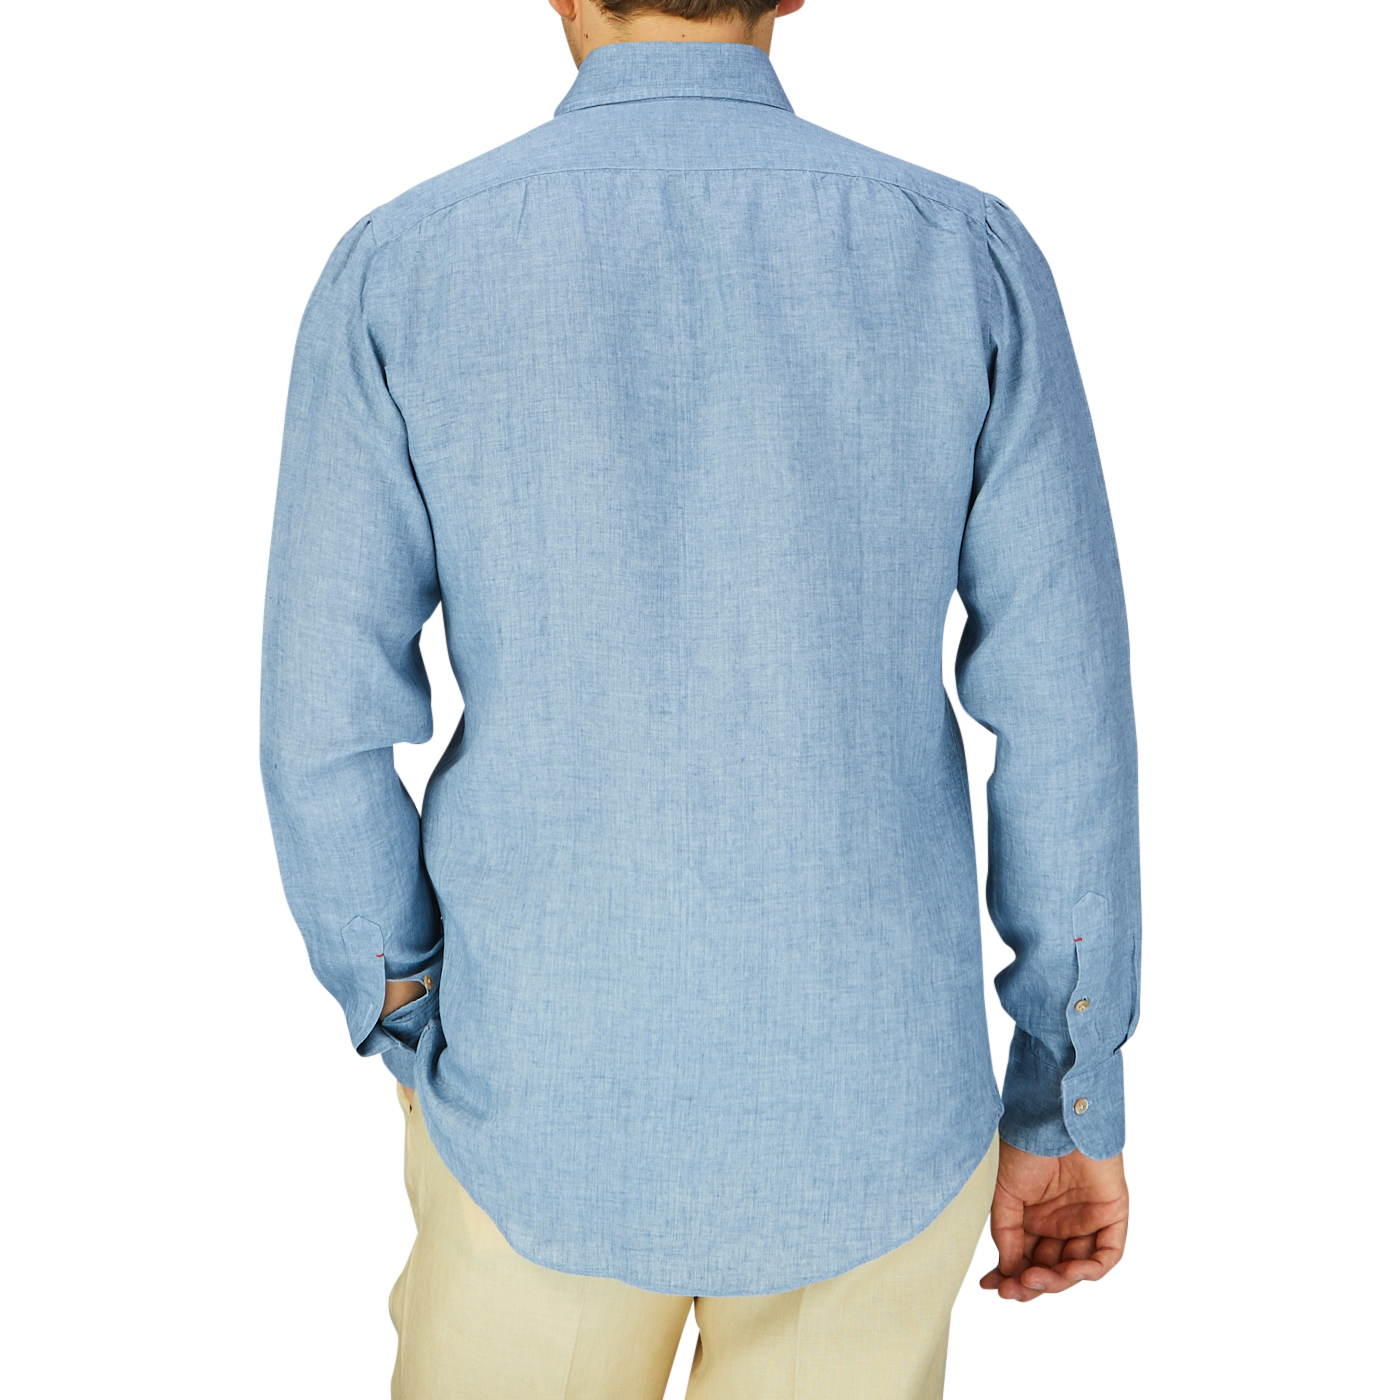 A person wearing a Denim Blue Washed Linen BD Slim Shirt by Mazzarelli viewed from the back.